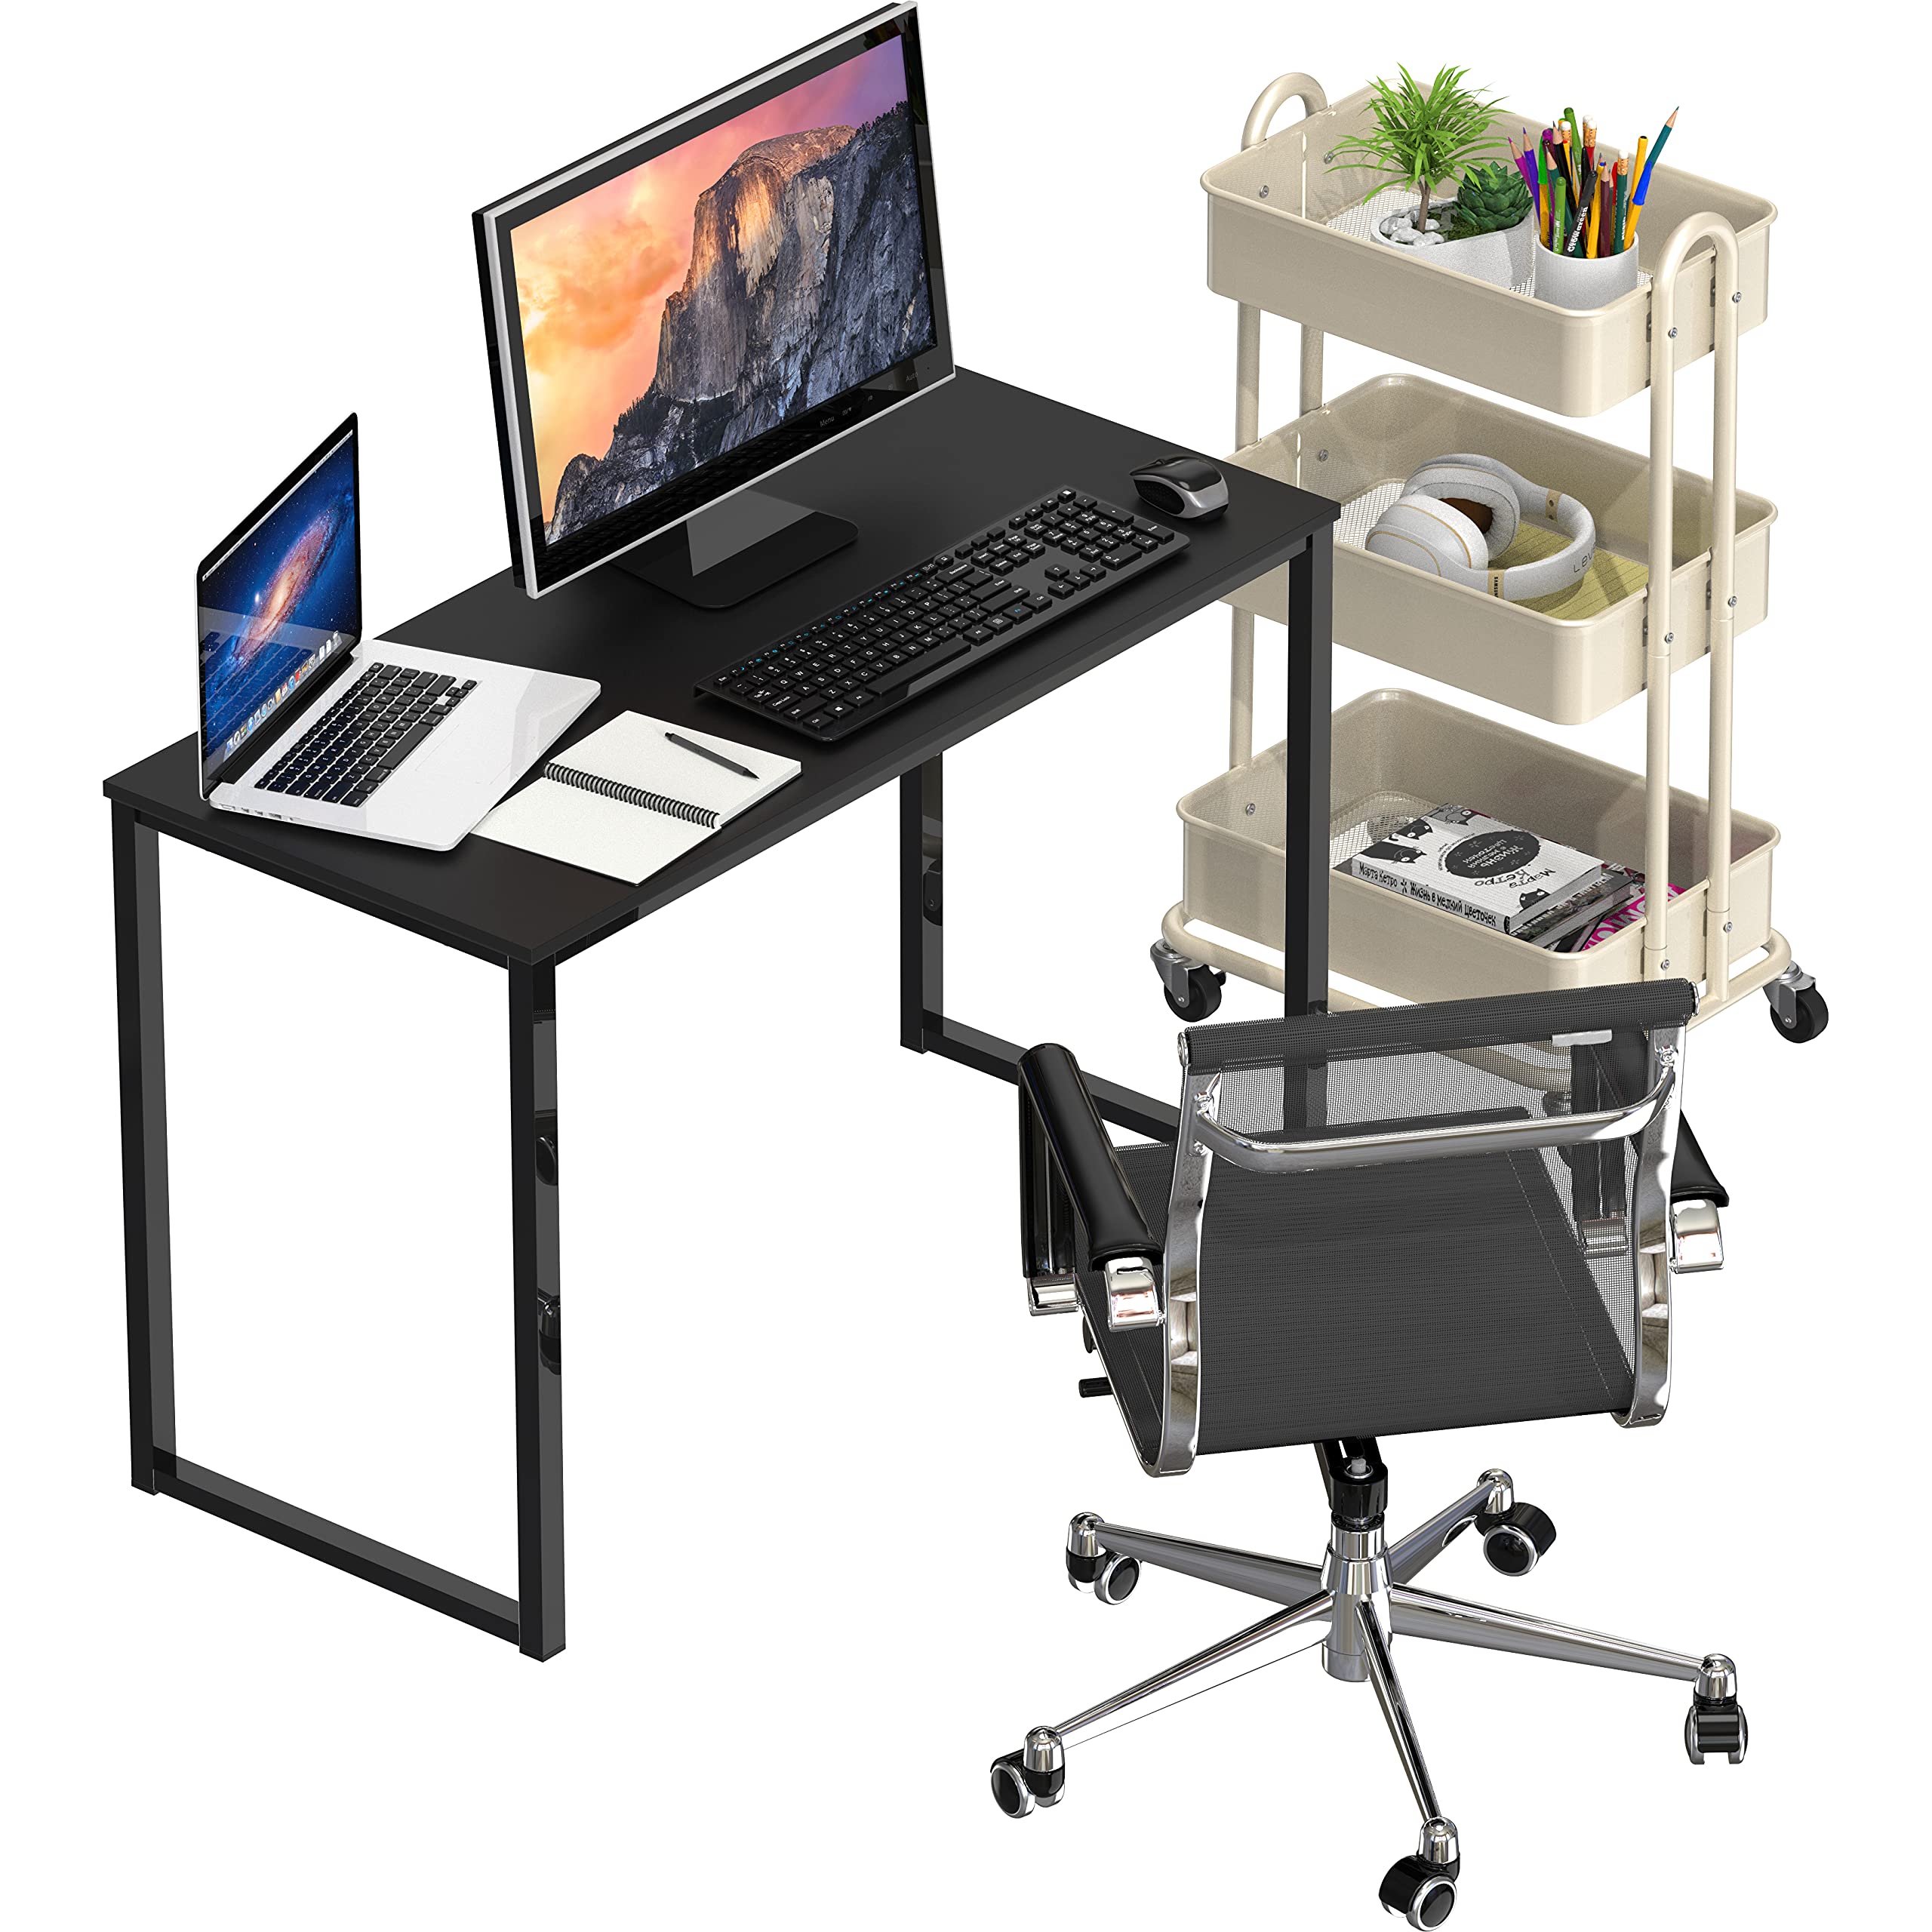 SHW Mission 32 inches office desk, Black - image 2 of 5